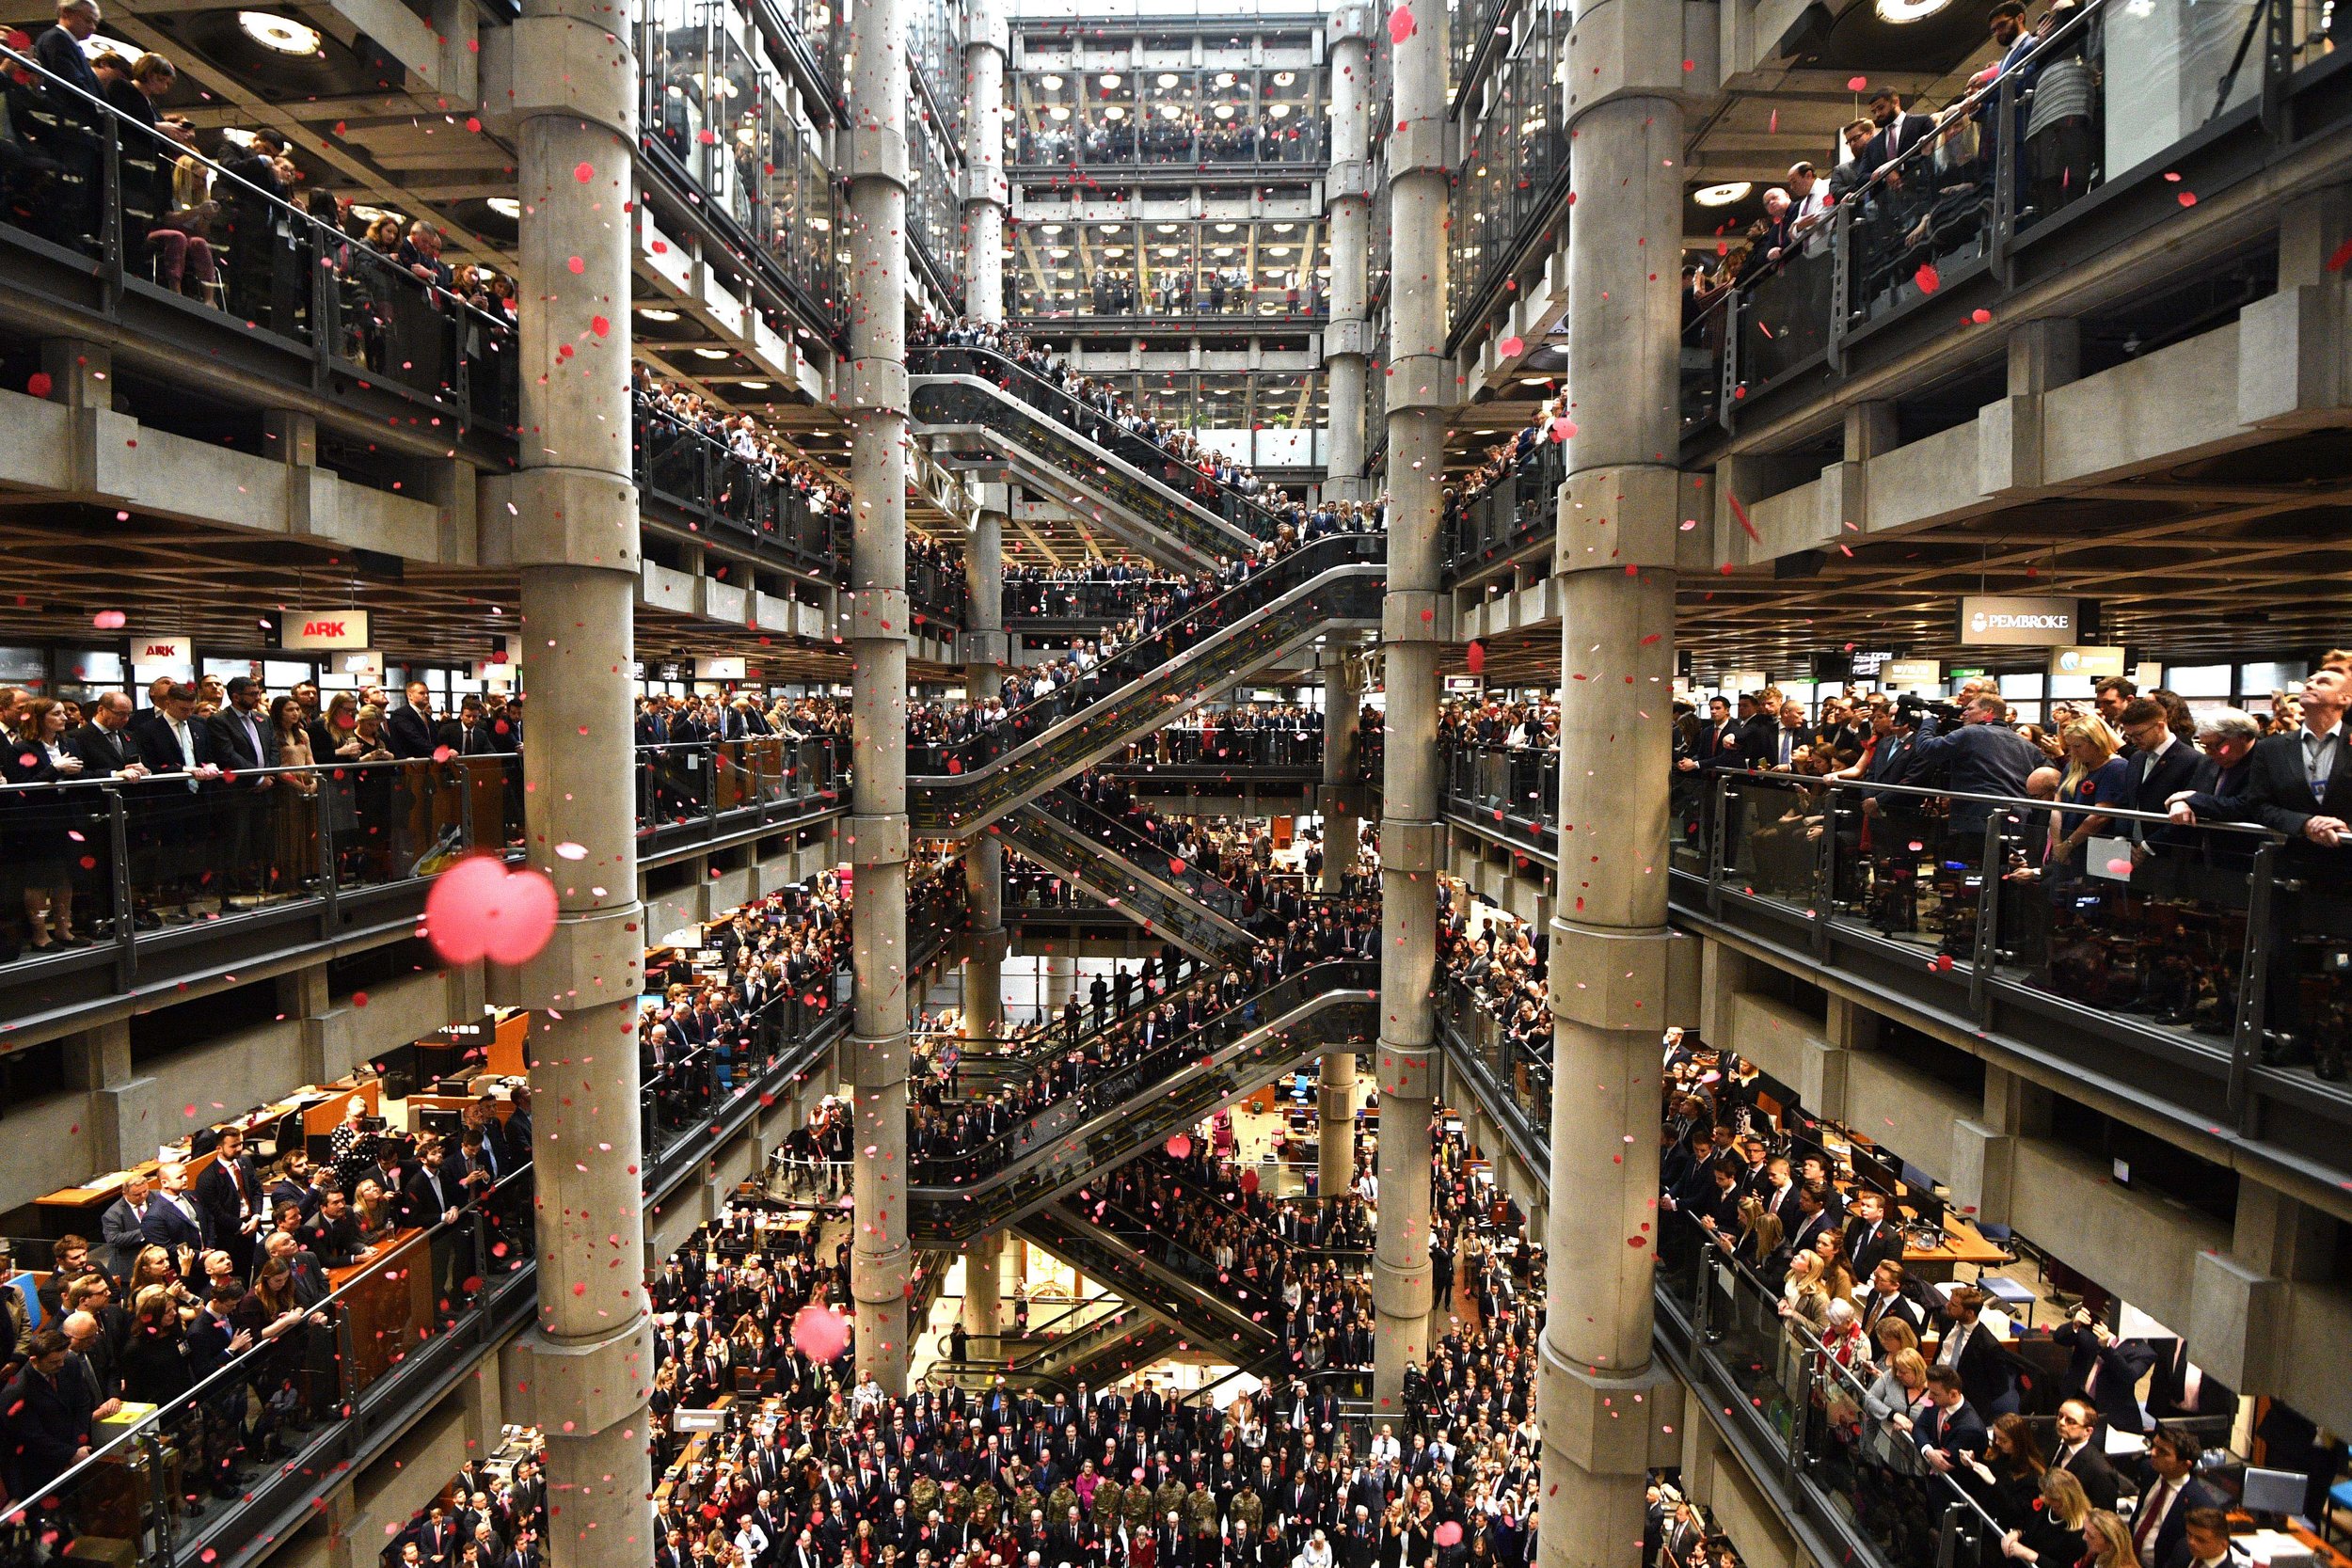  Staff line the atrium as poppies fall during an Armistice Commemoration Service at Lloyds of London. The 11th of November 2018 marks 100 years since the end of the First World War.


Photo by Neil Hall, 09 November 2018
 